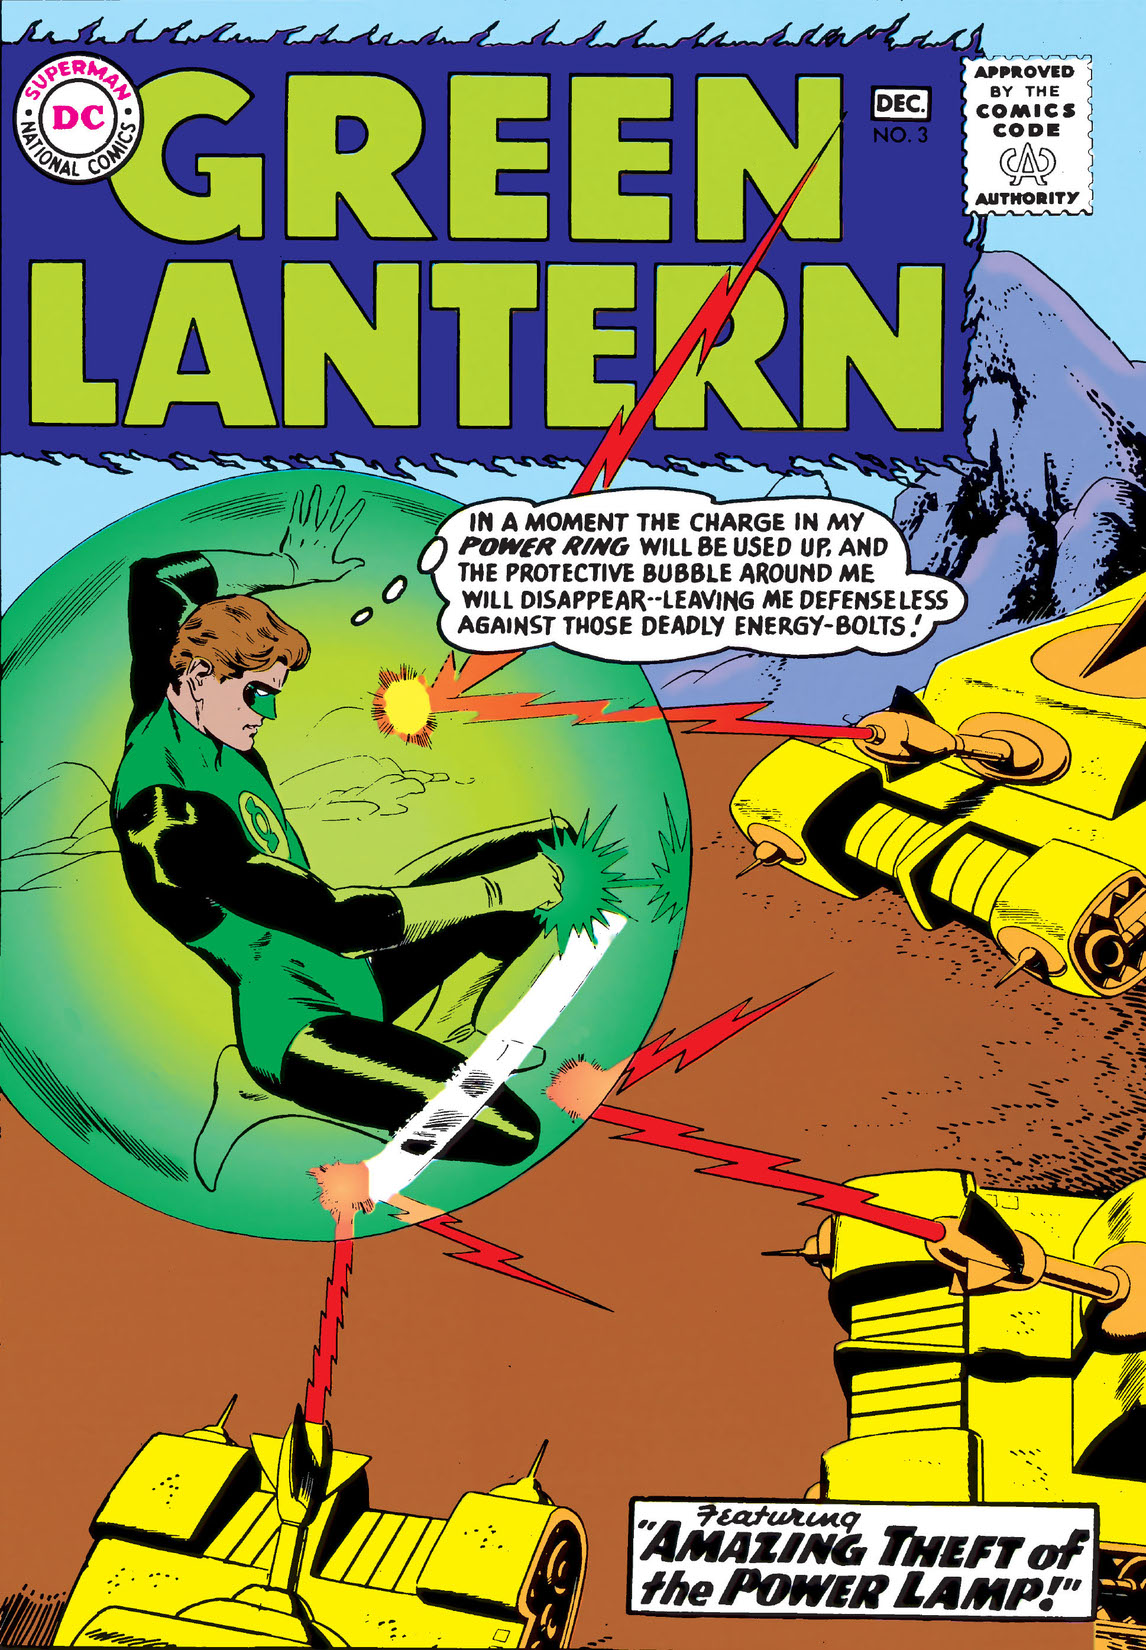 Green Lantern (1960-) #3 preview images